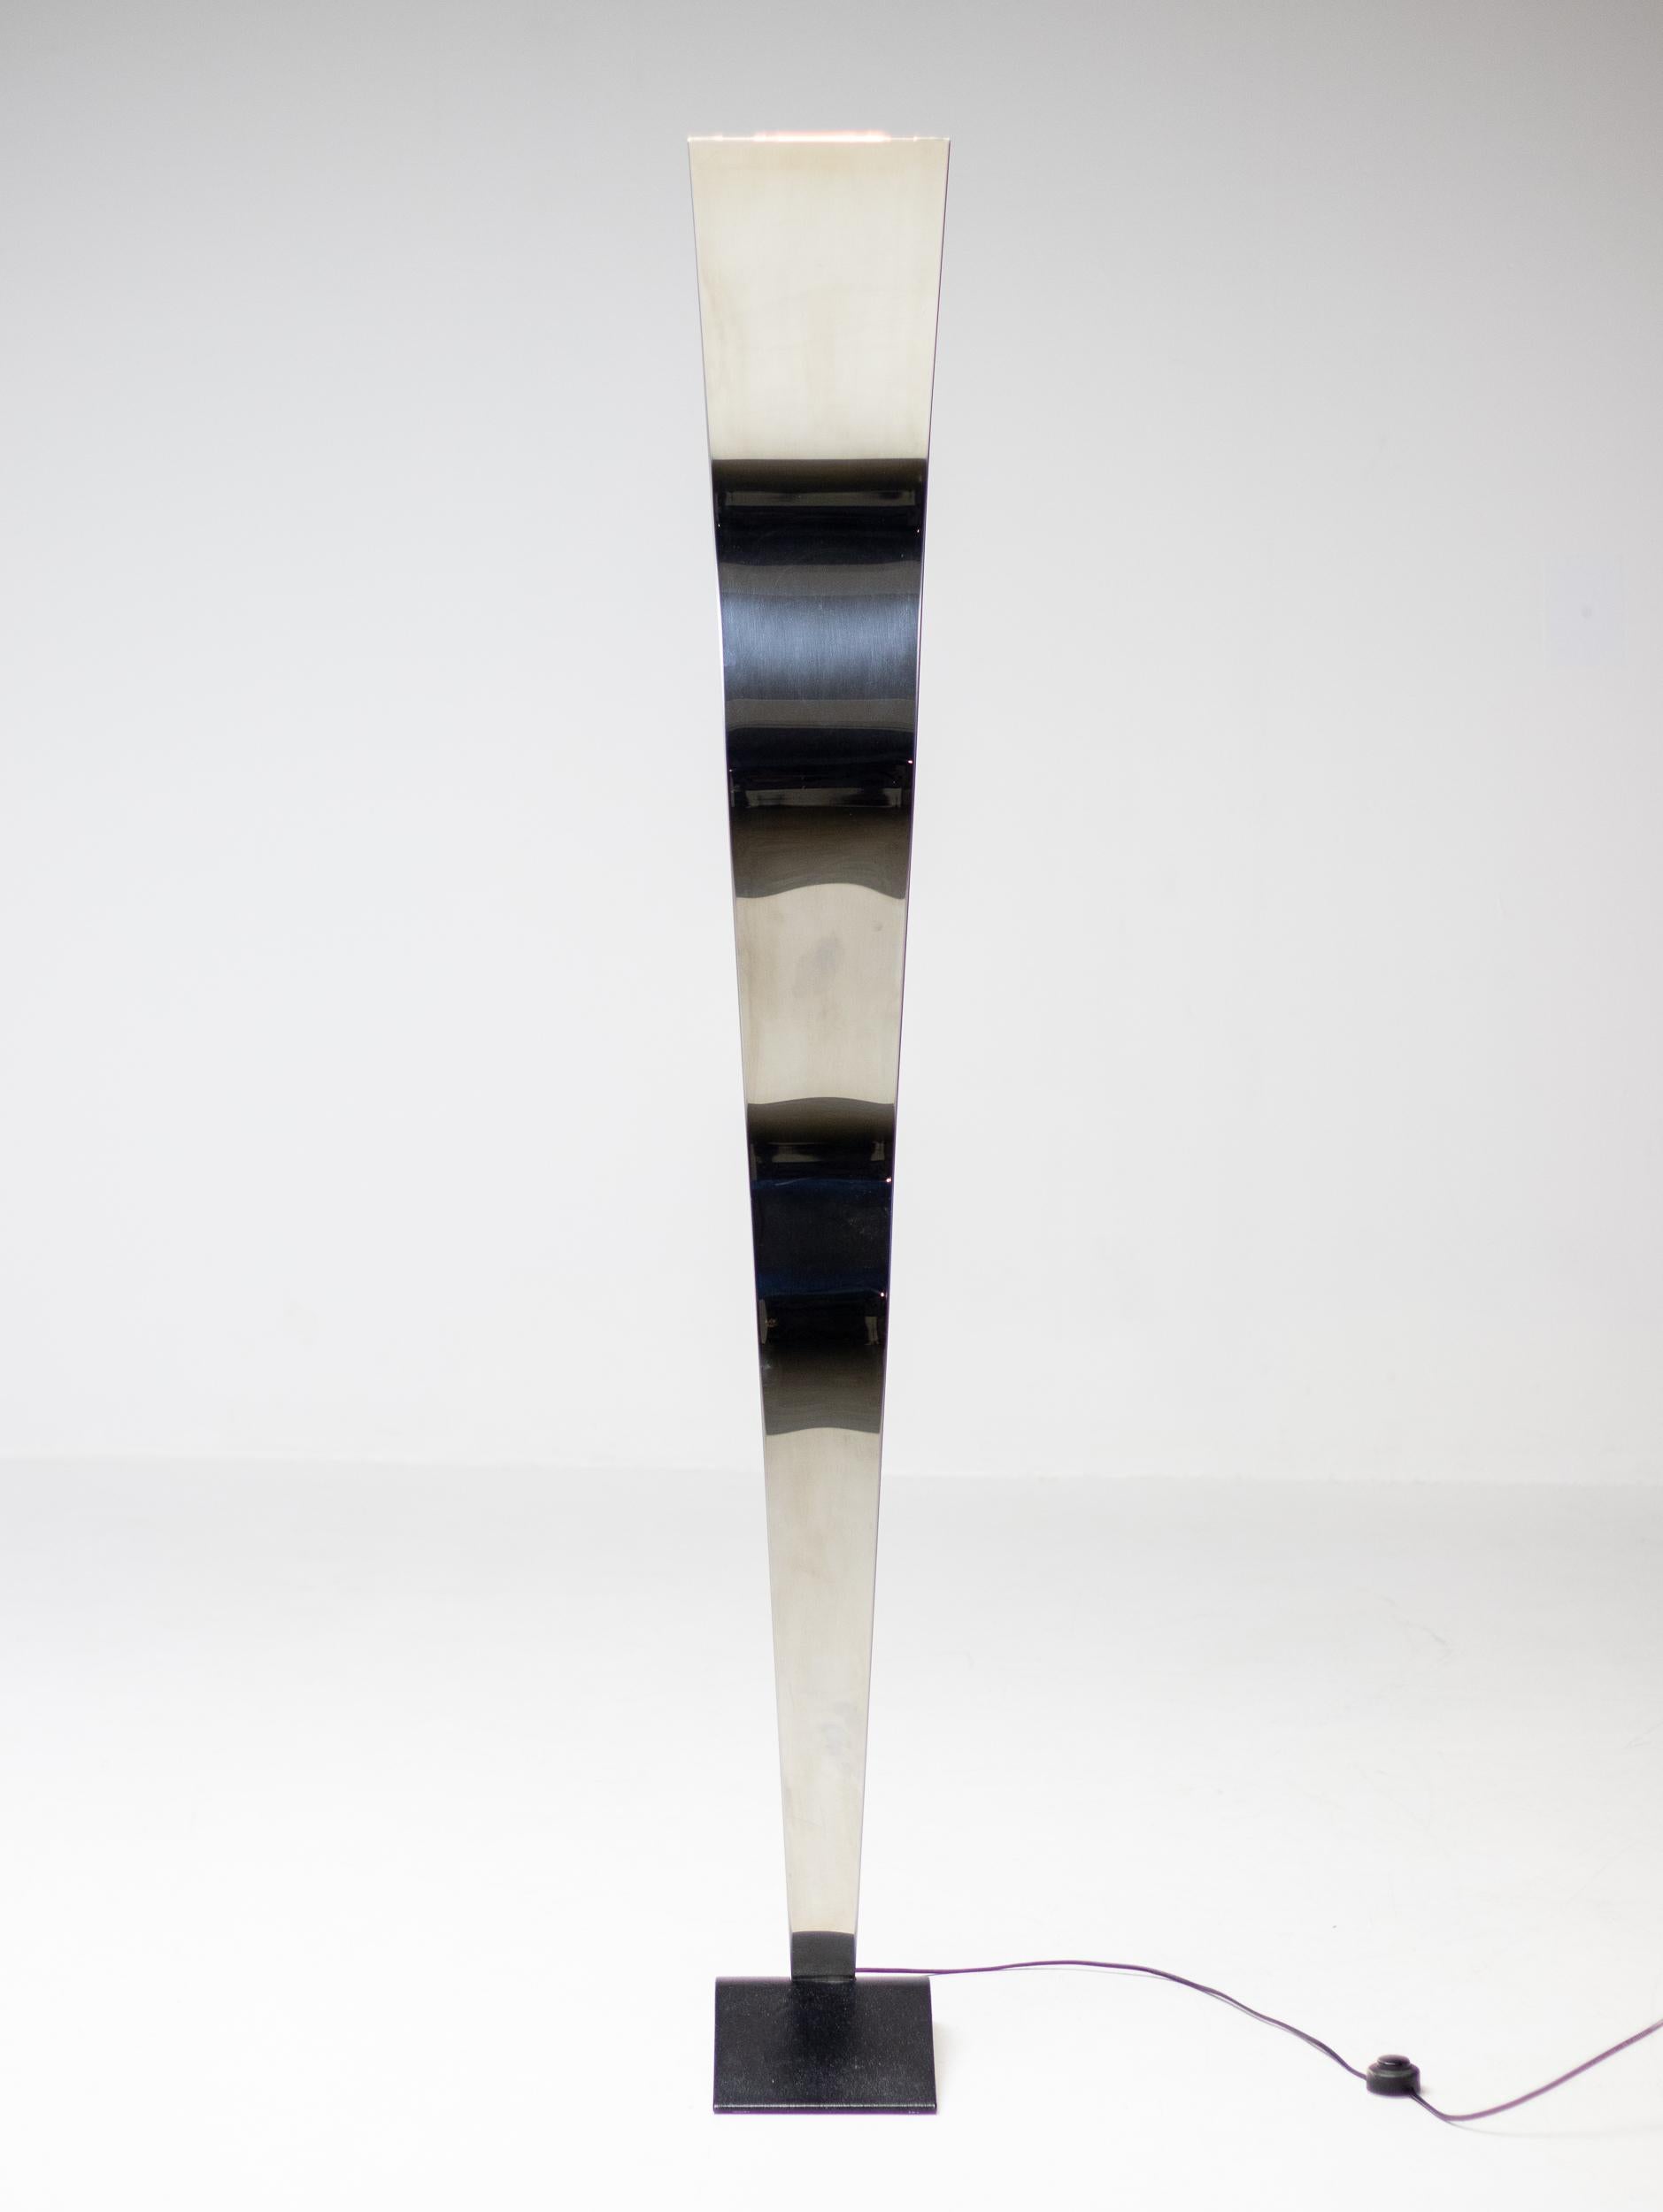 Unique 1970s Italian uplighter made of high gloss polished stainless steel that resembles a standing person from the side and a distorting mirror from the front. Most likely made by Fontana Arte but not marked.
The lamp came from an Italian villa